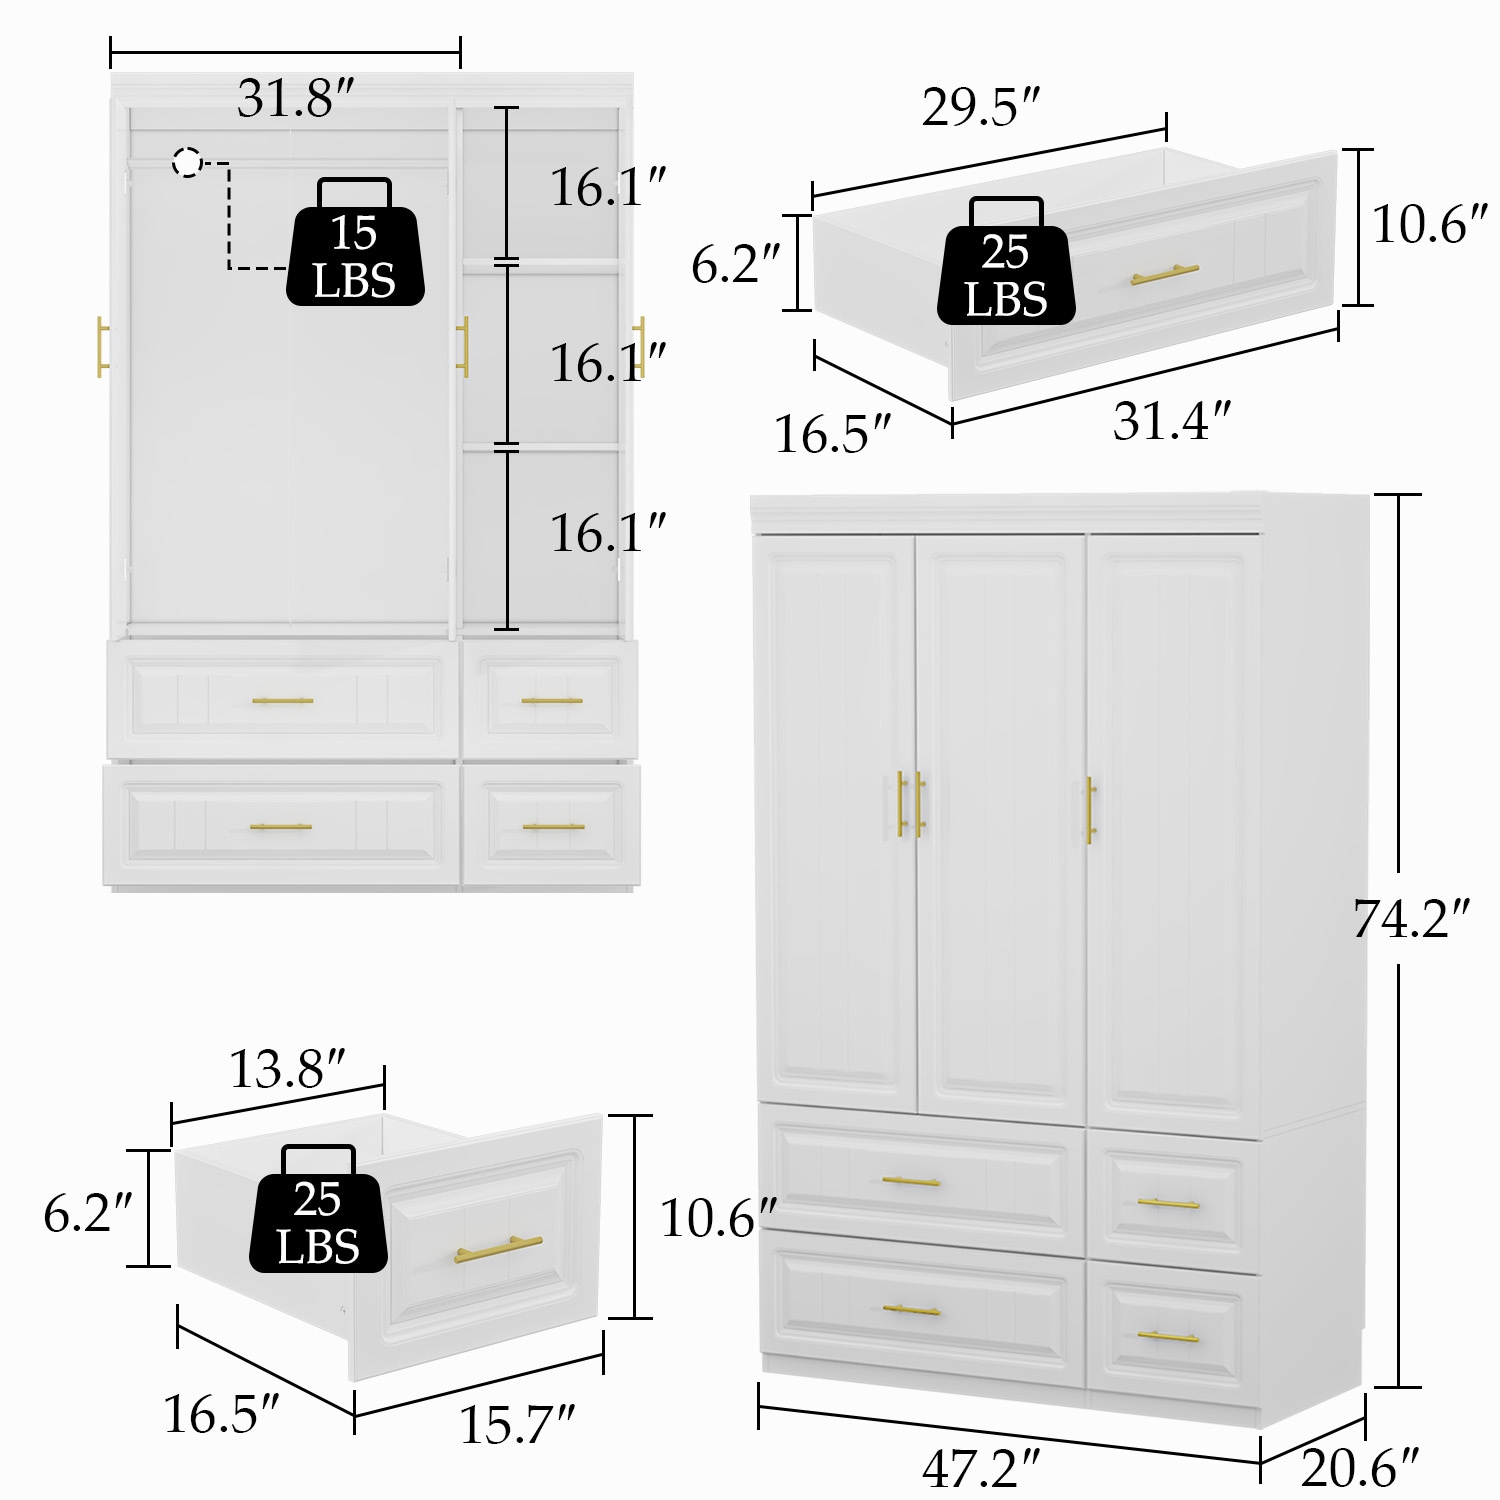 FUFU&GAGA Contemporary 3-Door Wardrobe Rails Multiple the Finish, Armoires Storage 4 with Closet Spaces - Metal at Slide White Drawers department in and